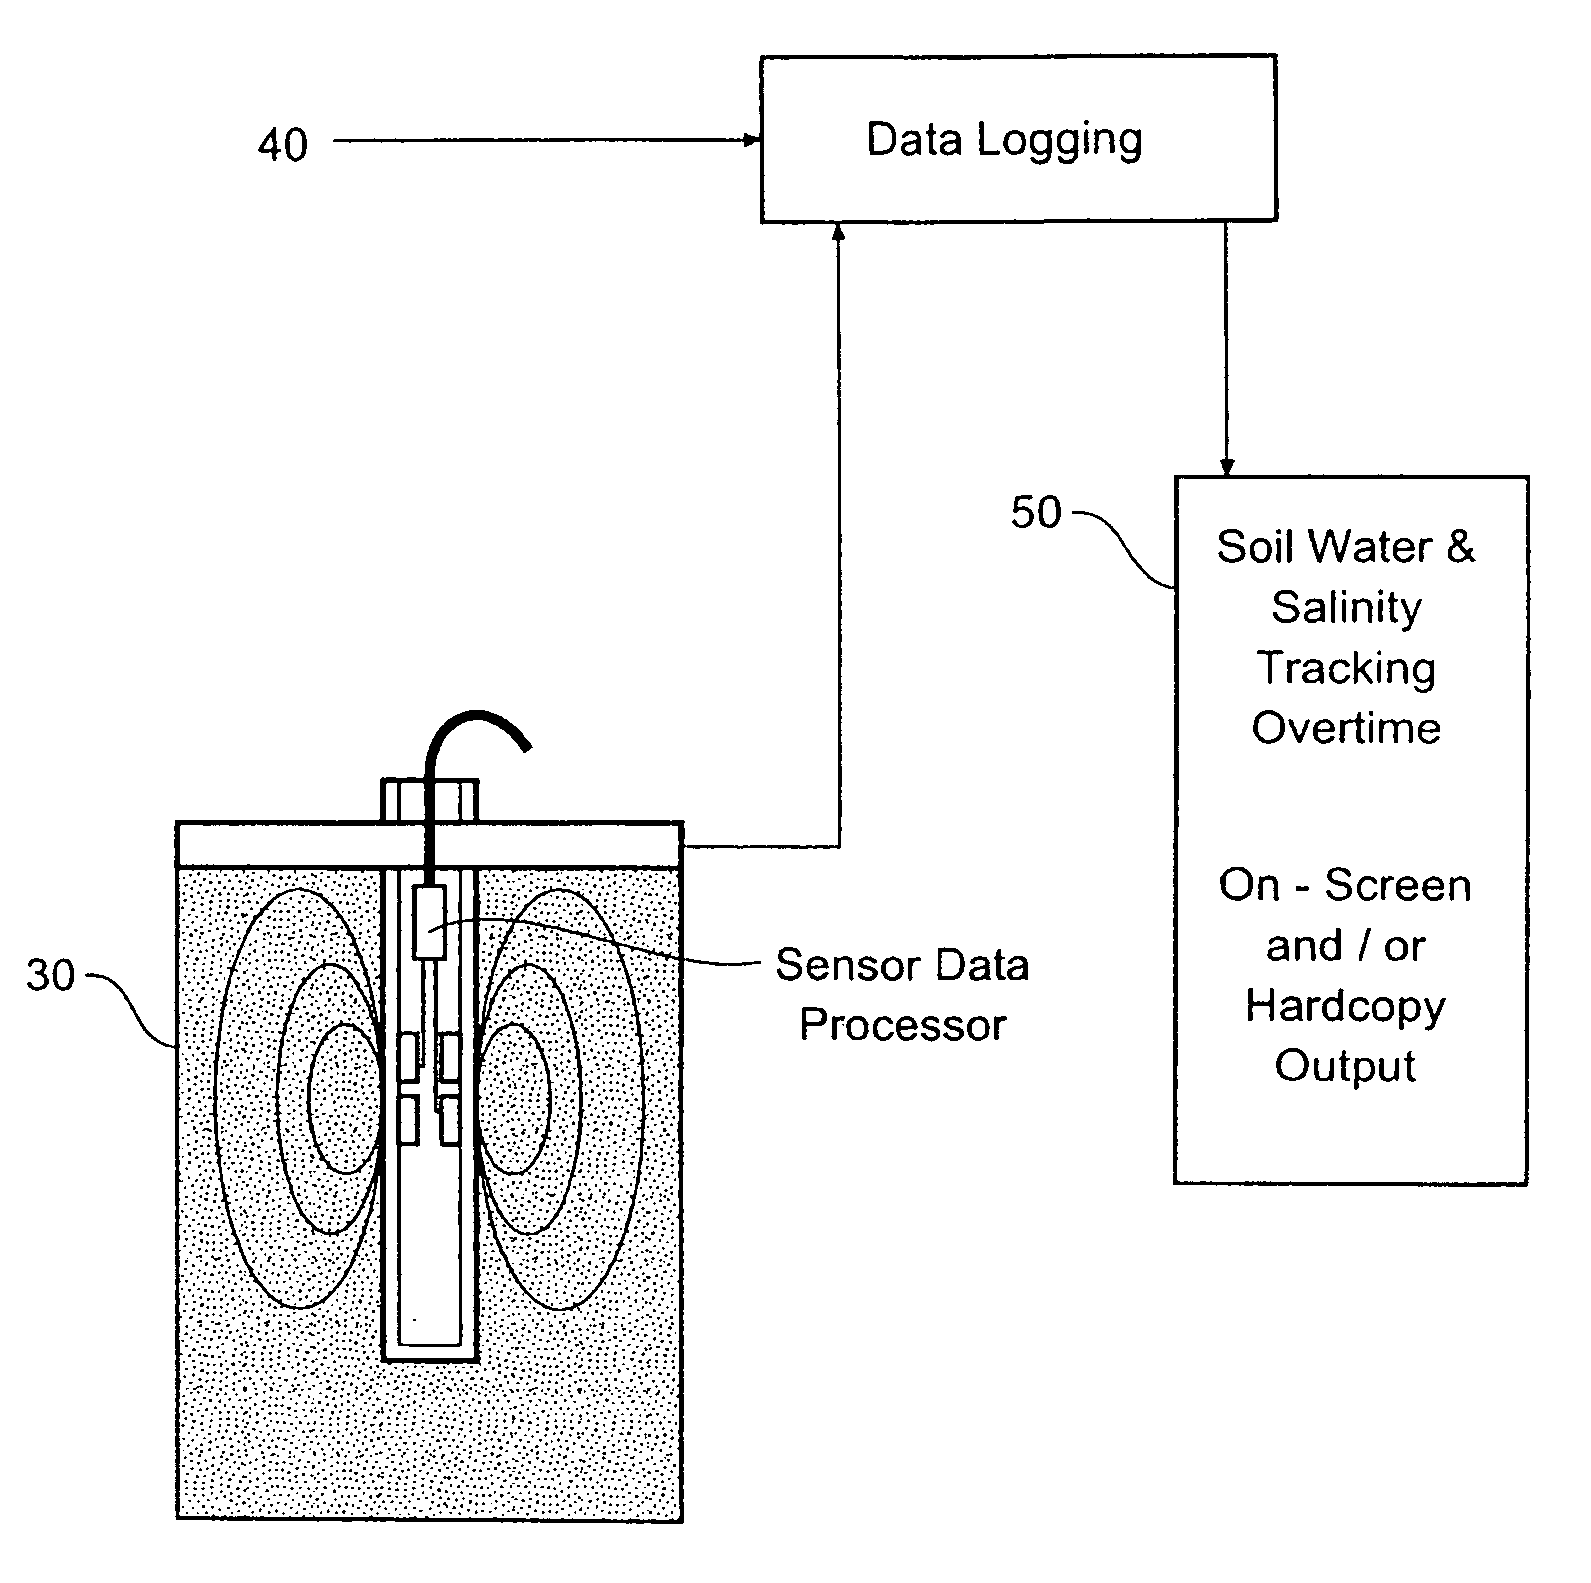 Soil matric potential and salinity measurement apparatus and method of use